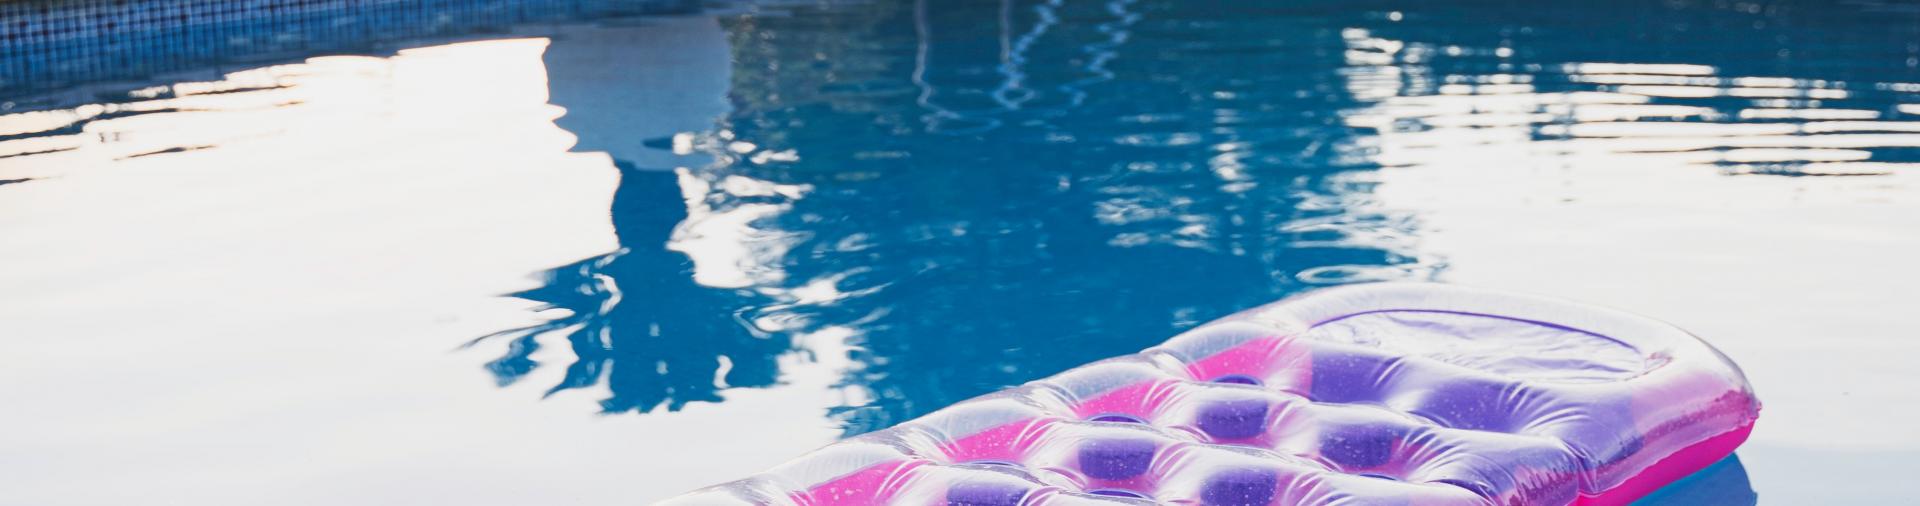 Pool with purple floating mat